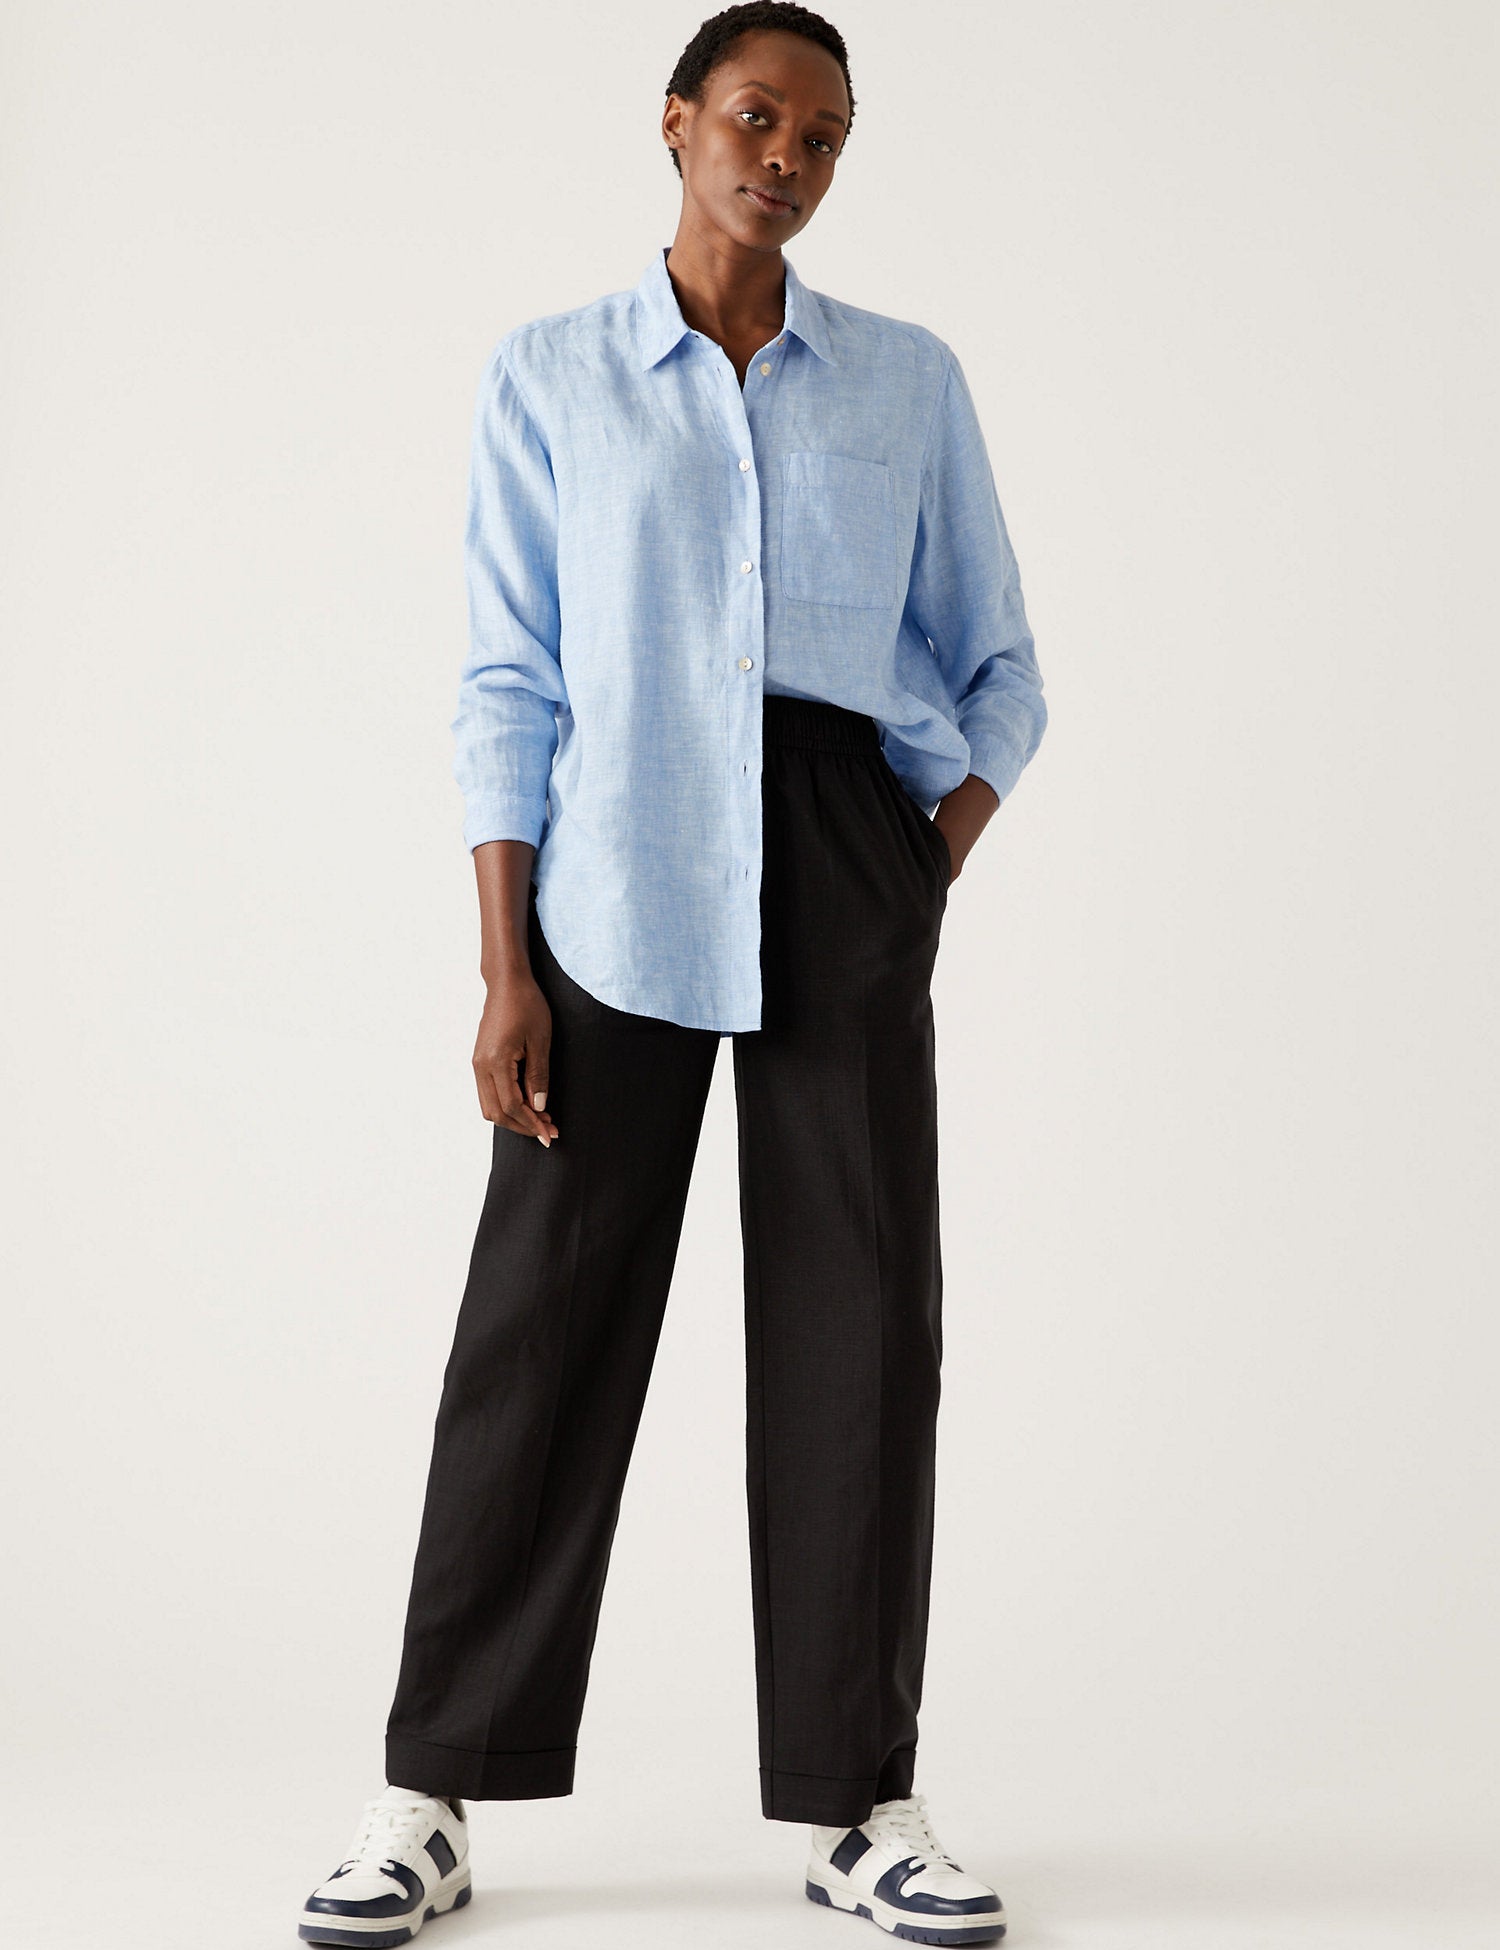 Linen Blend Relaxed Straight Trousers